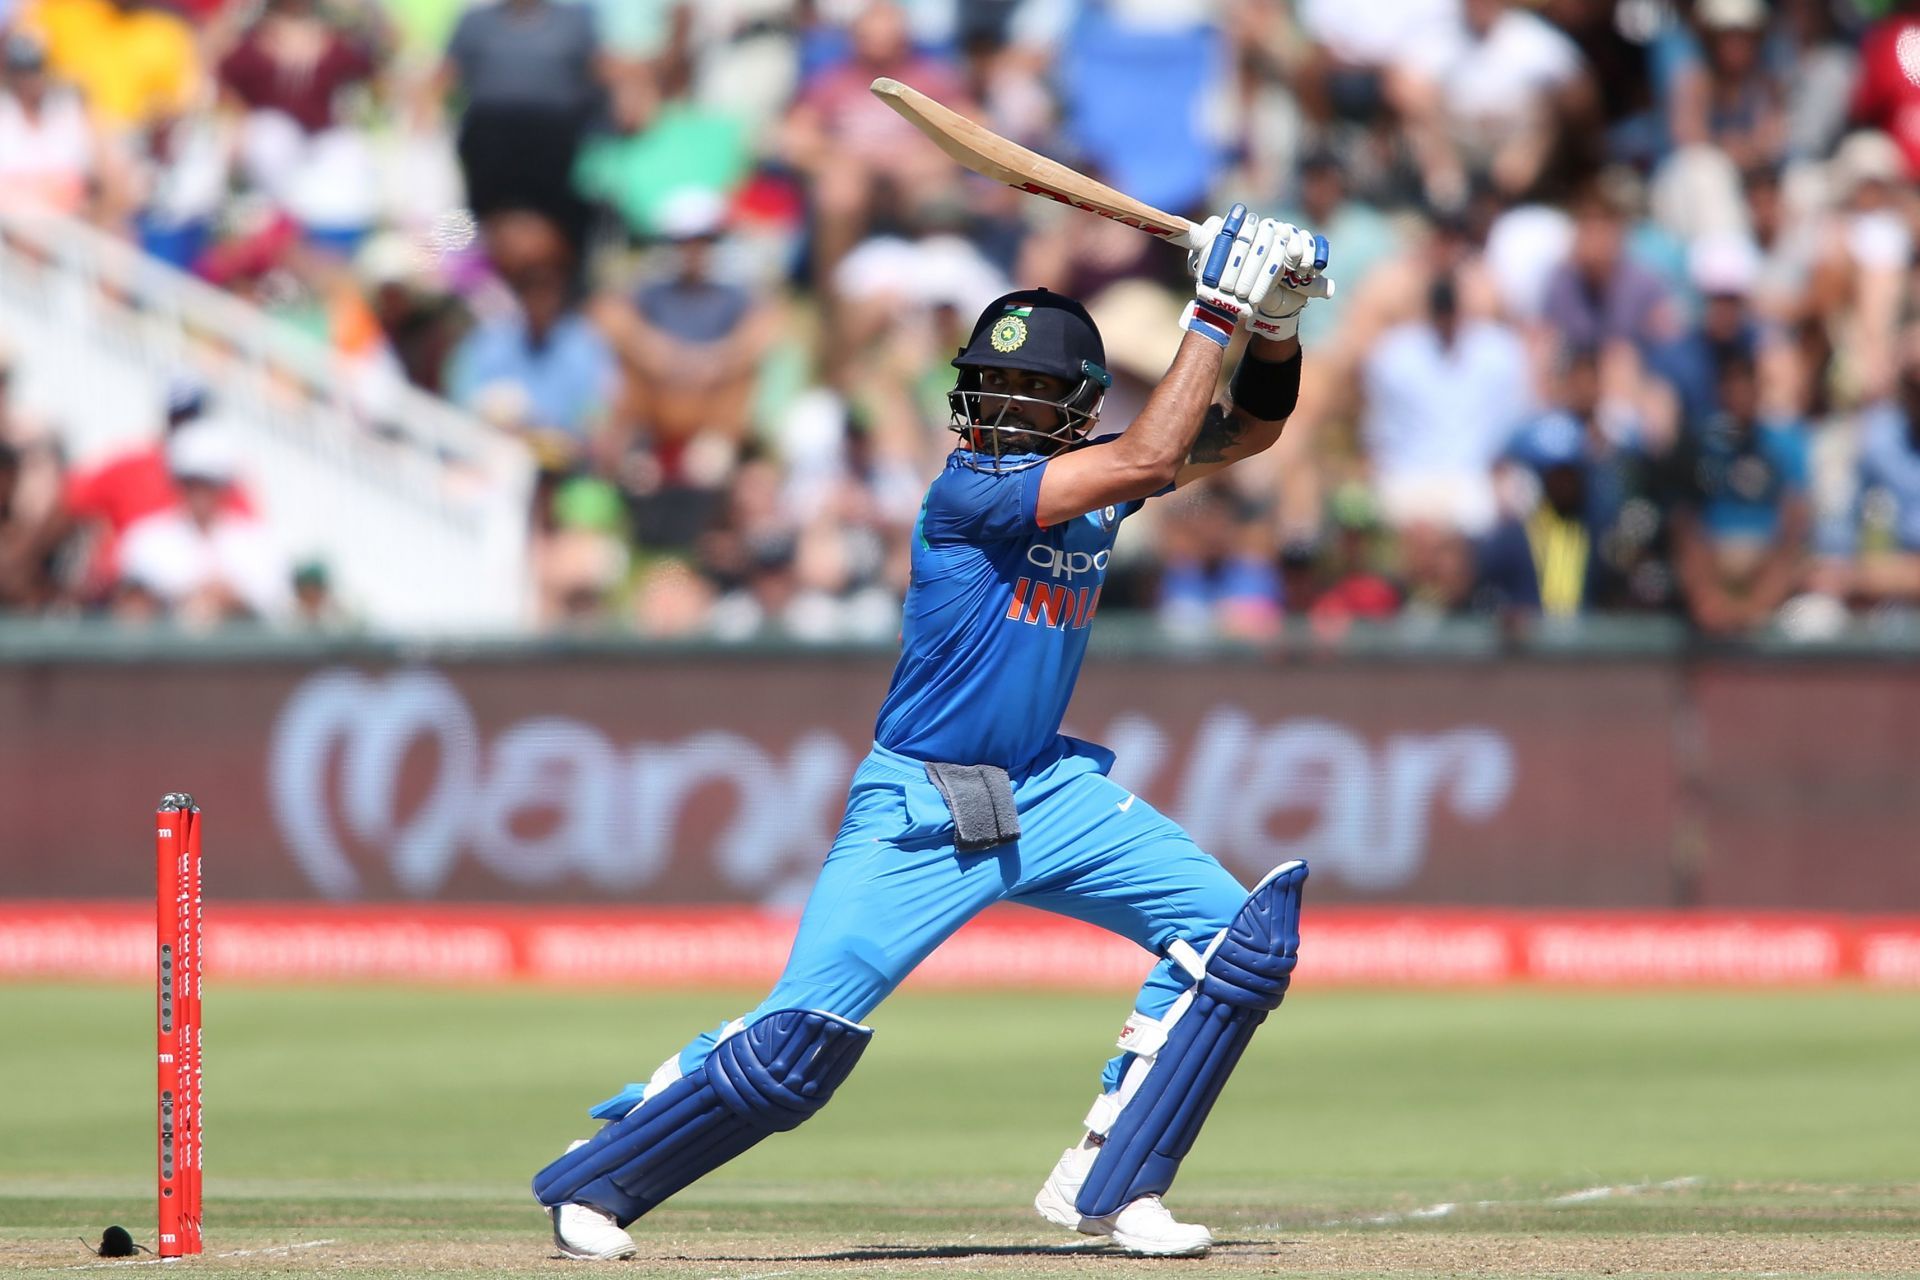 Virat Kohli batting during the 2017-18 series in South Africa. Pic: Getty Images